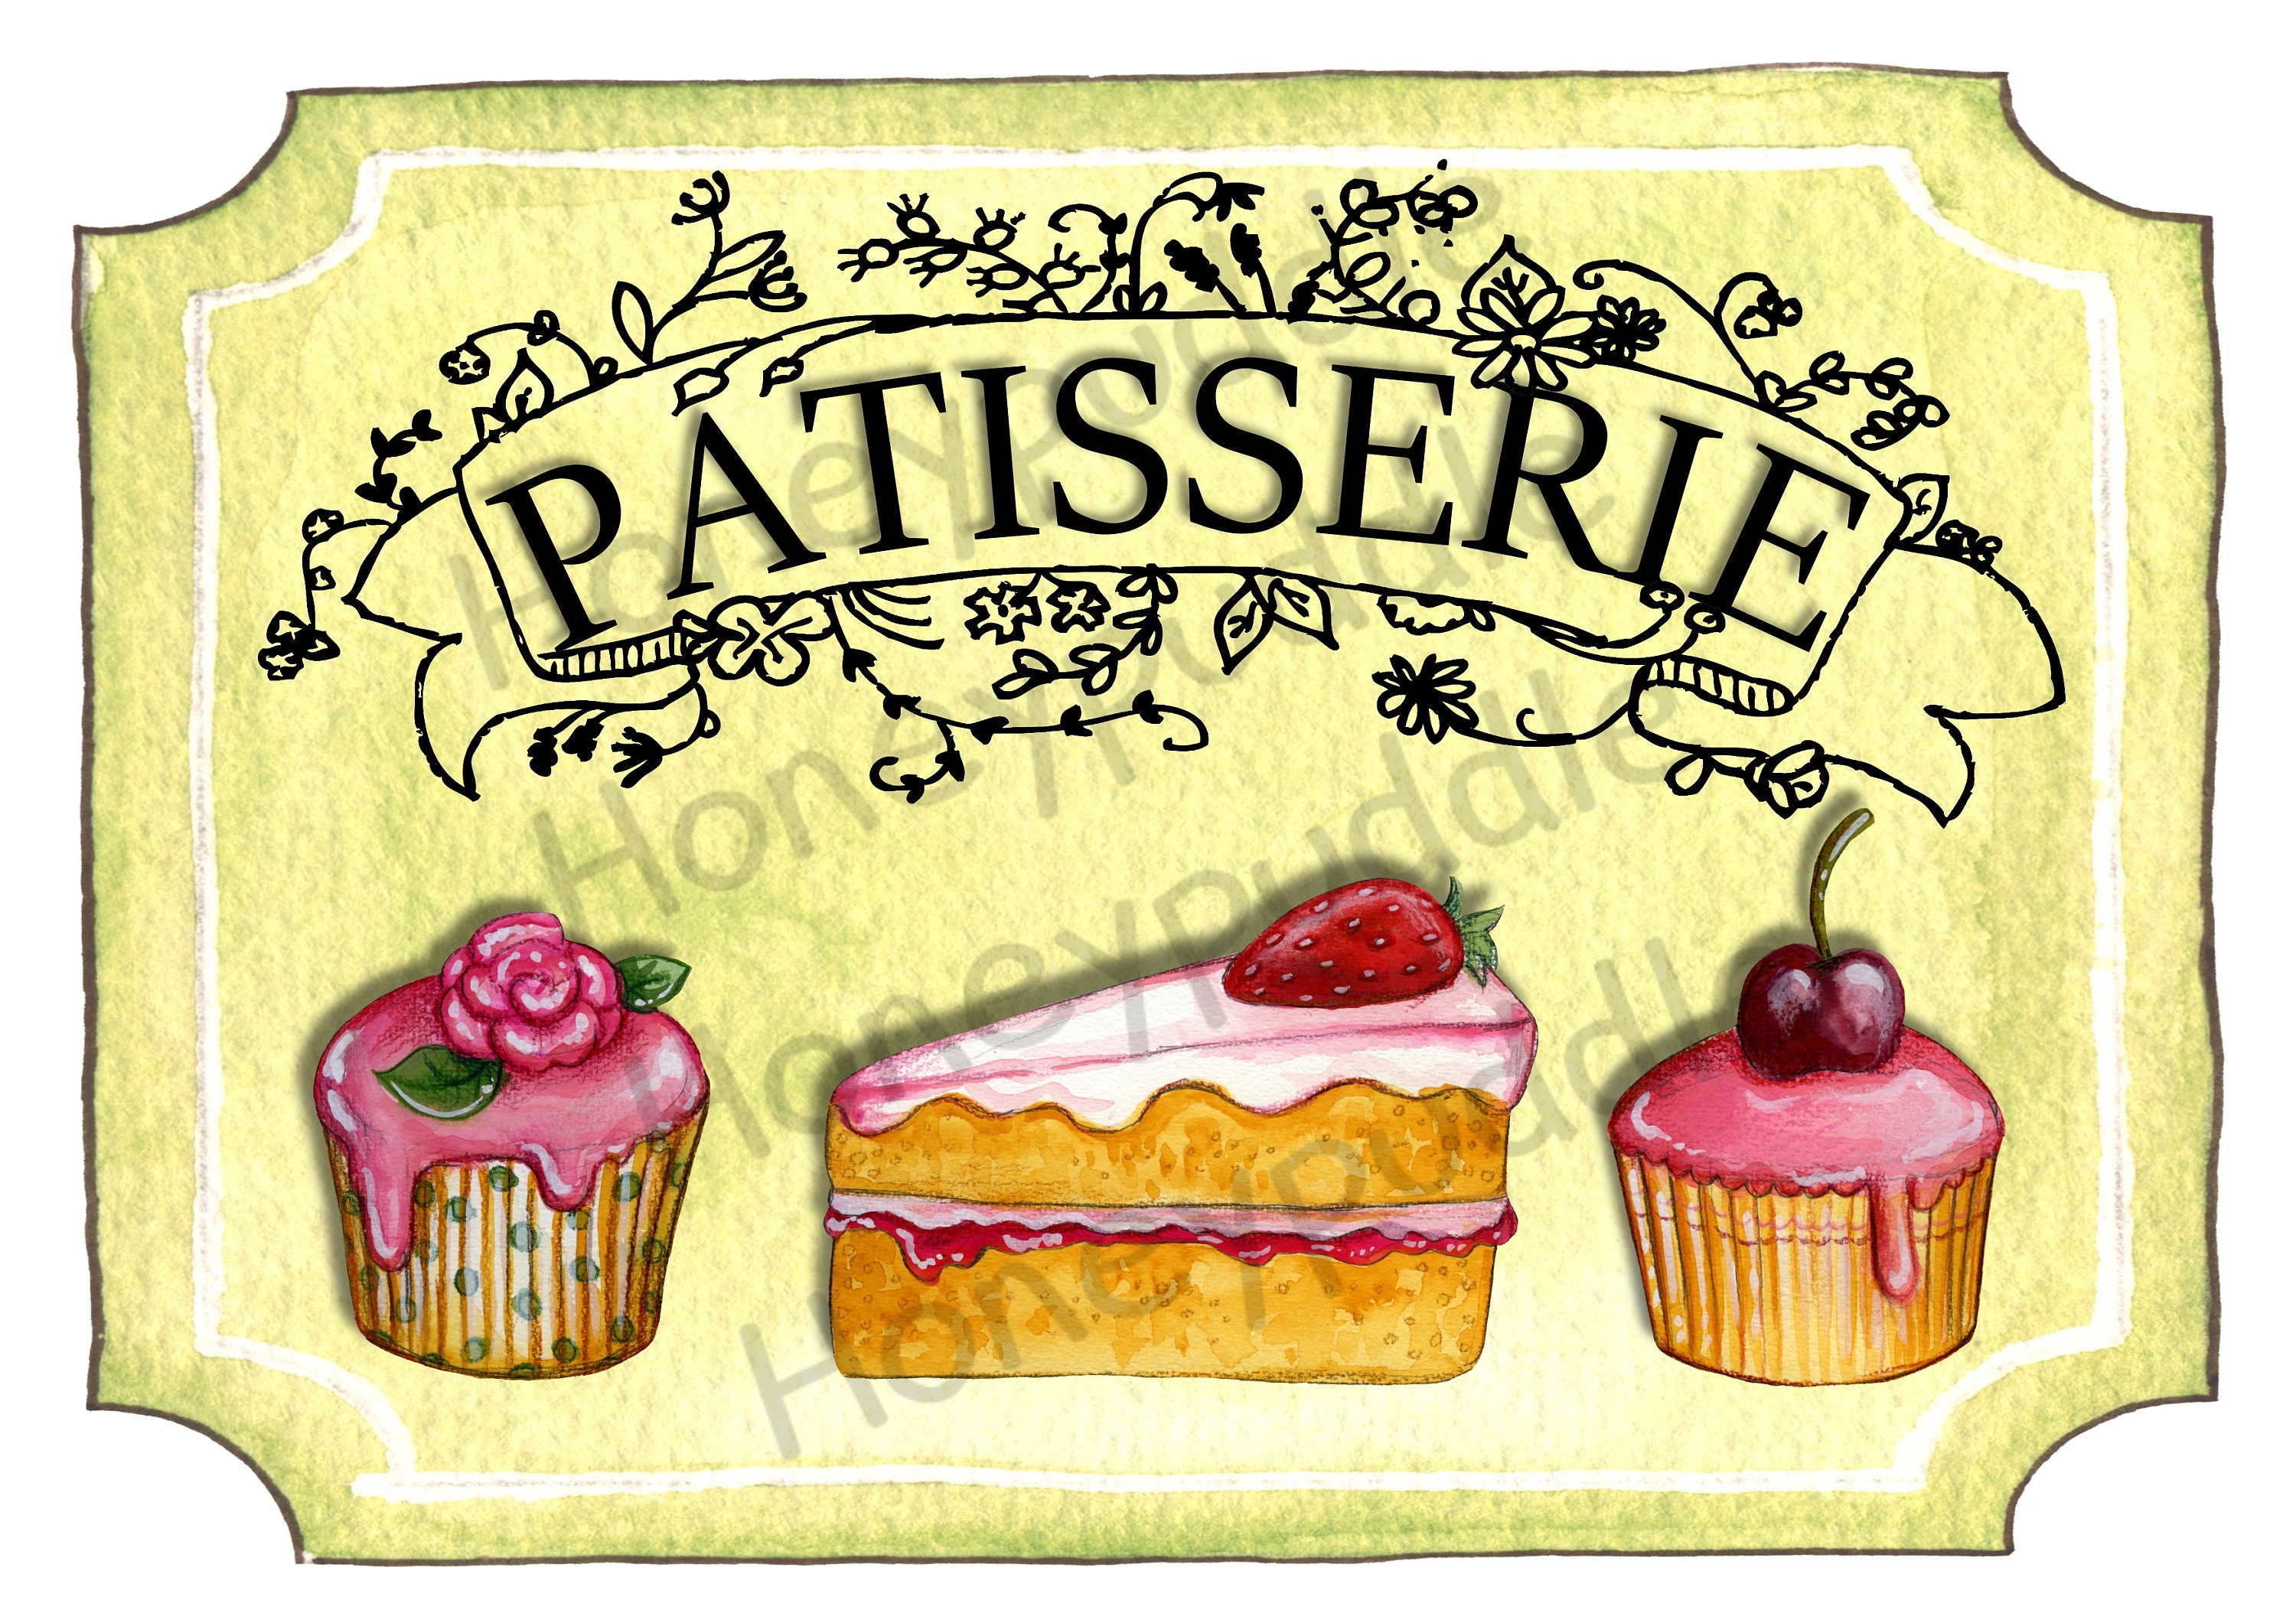 Patisserie Sign Art Print A4 Wall Art Cake Shop French